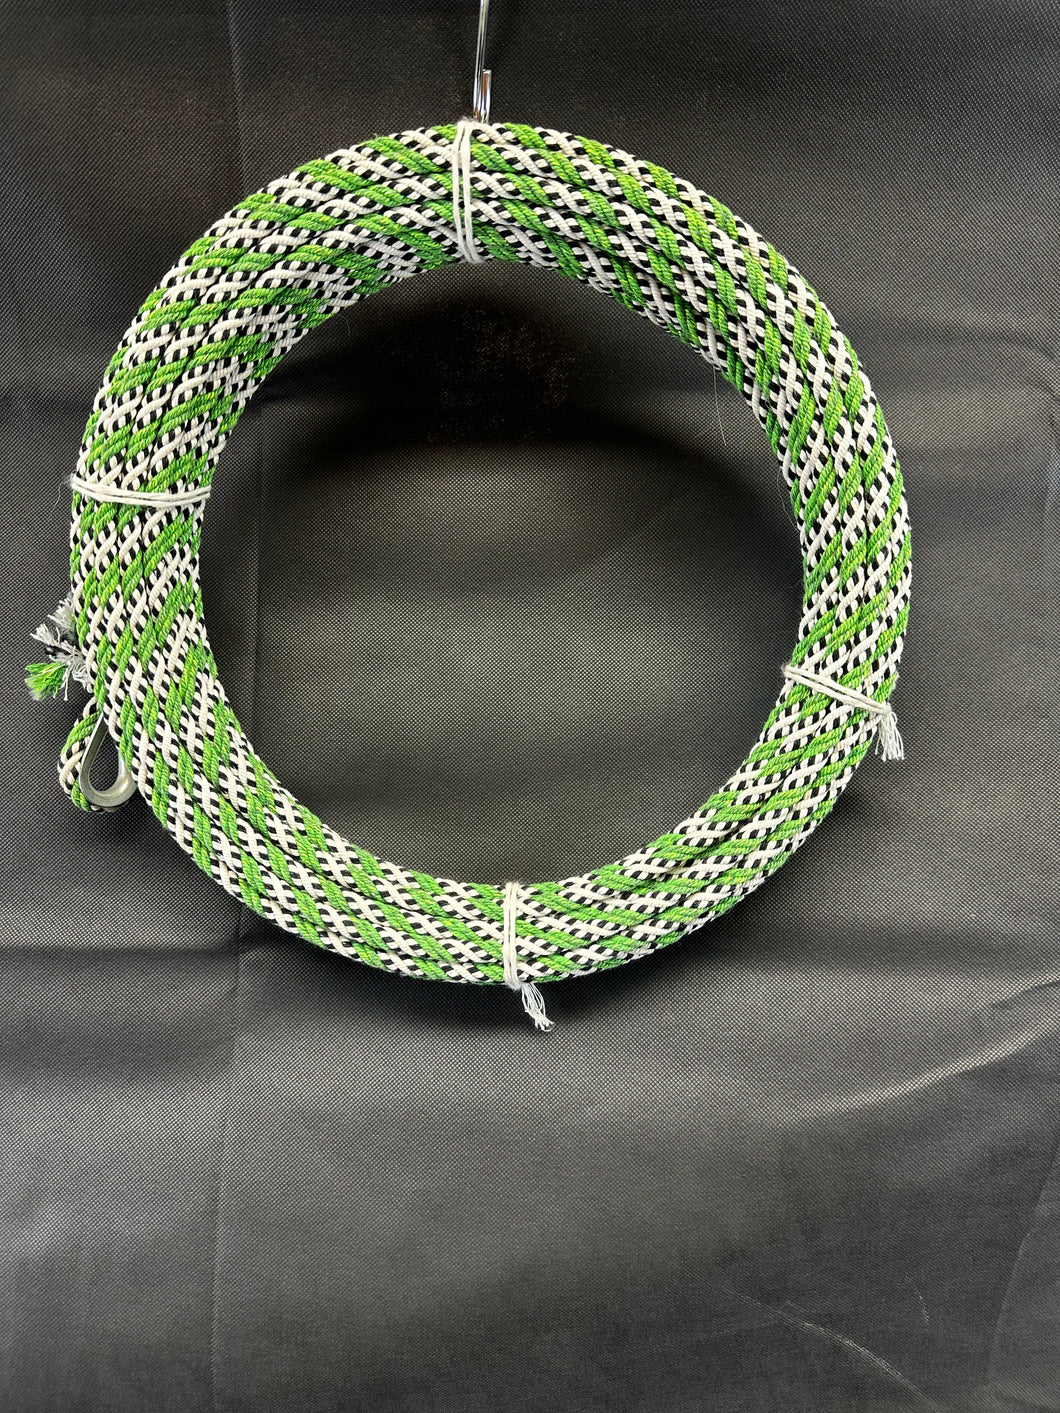 Cotton Rope, 5/16, 65 foot